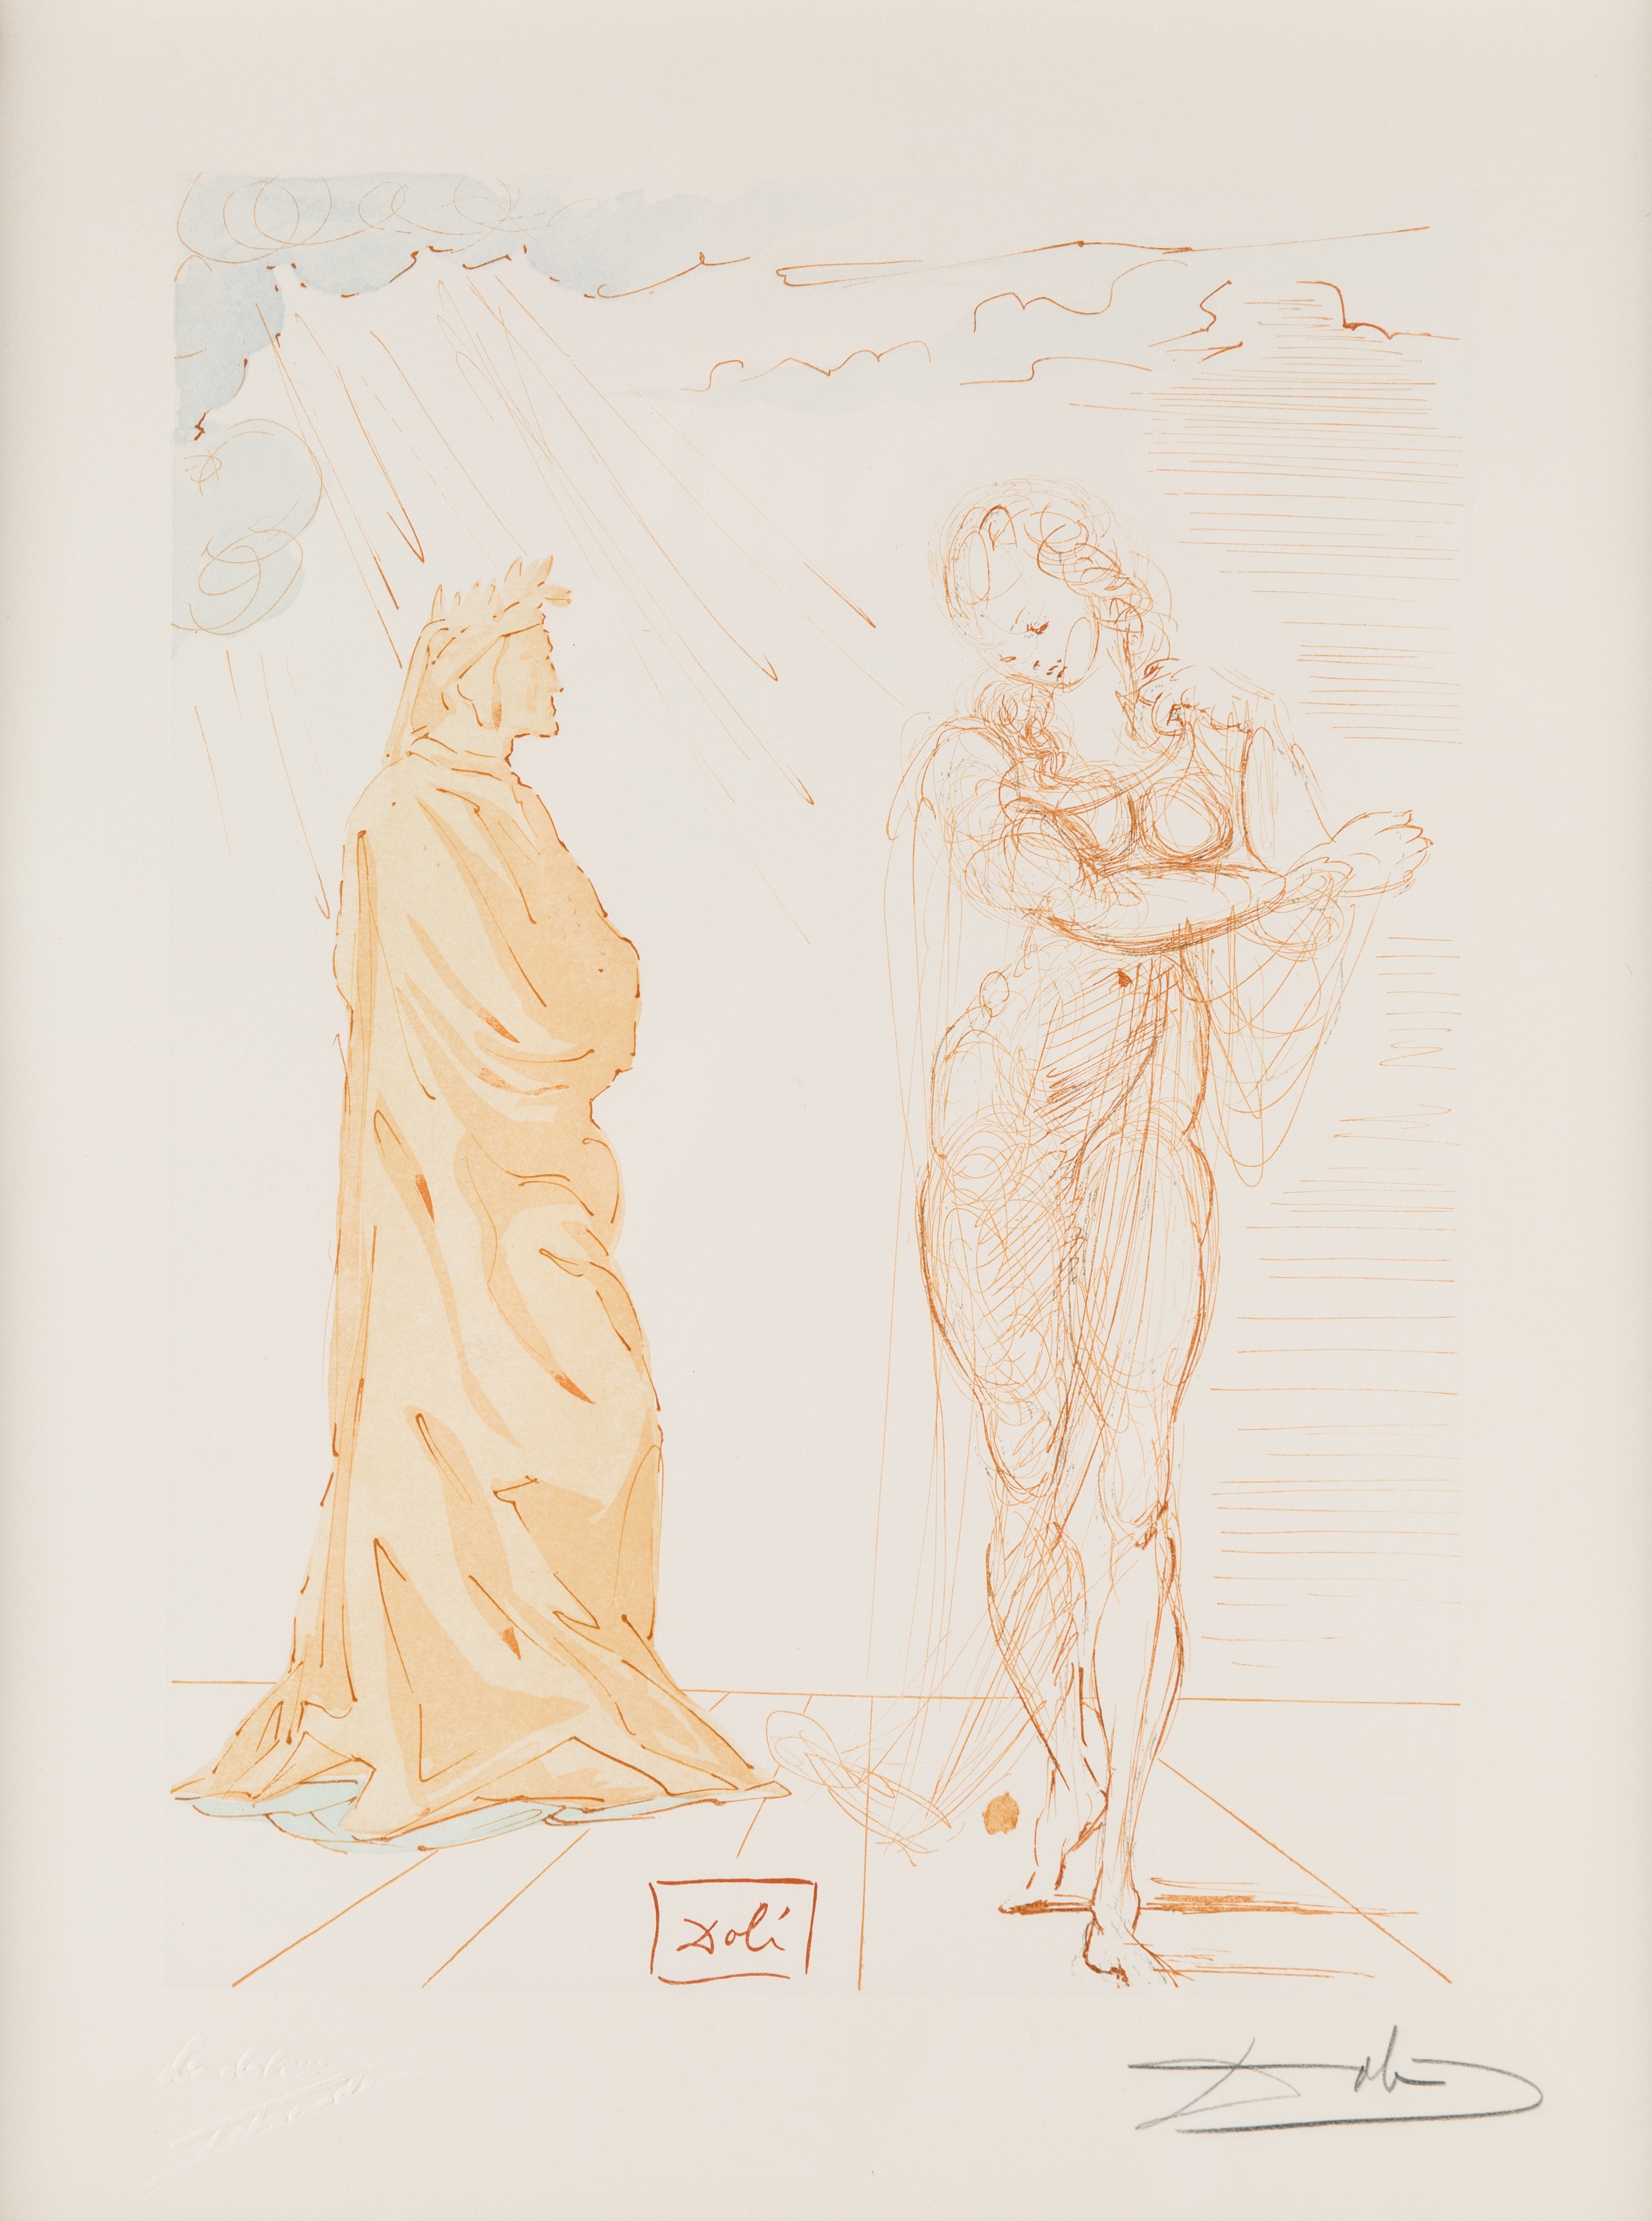 Inferno, Canto 2 : Beatrice and Virgil, illustration from The